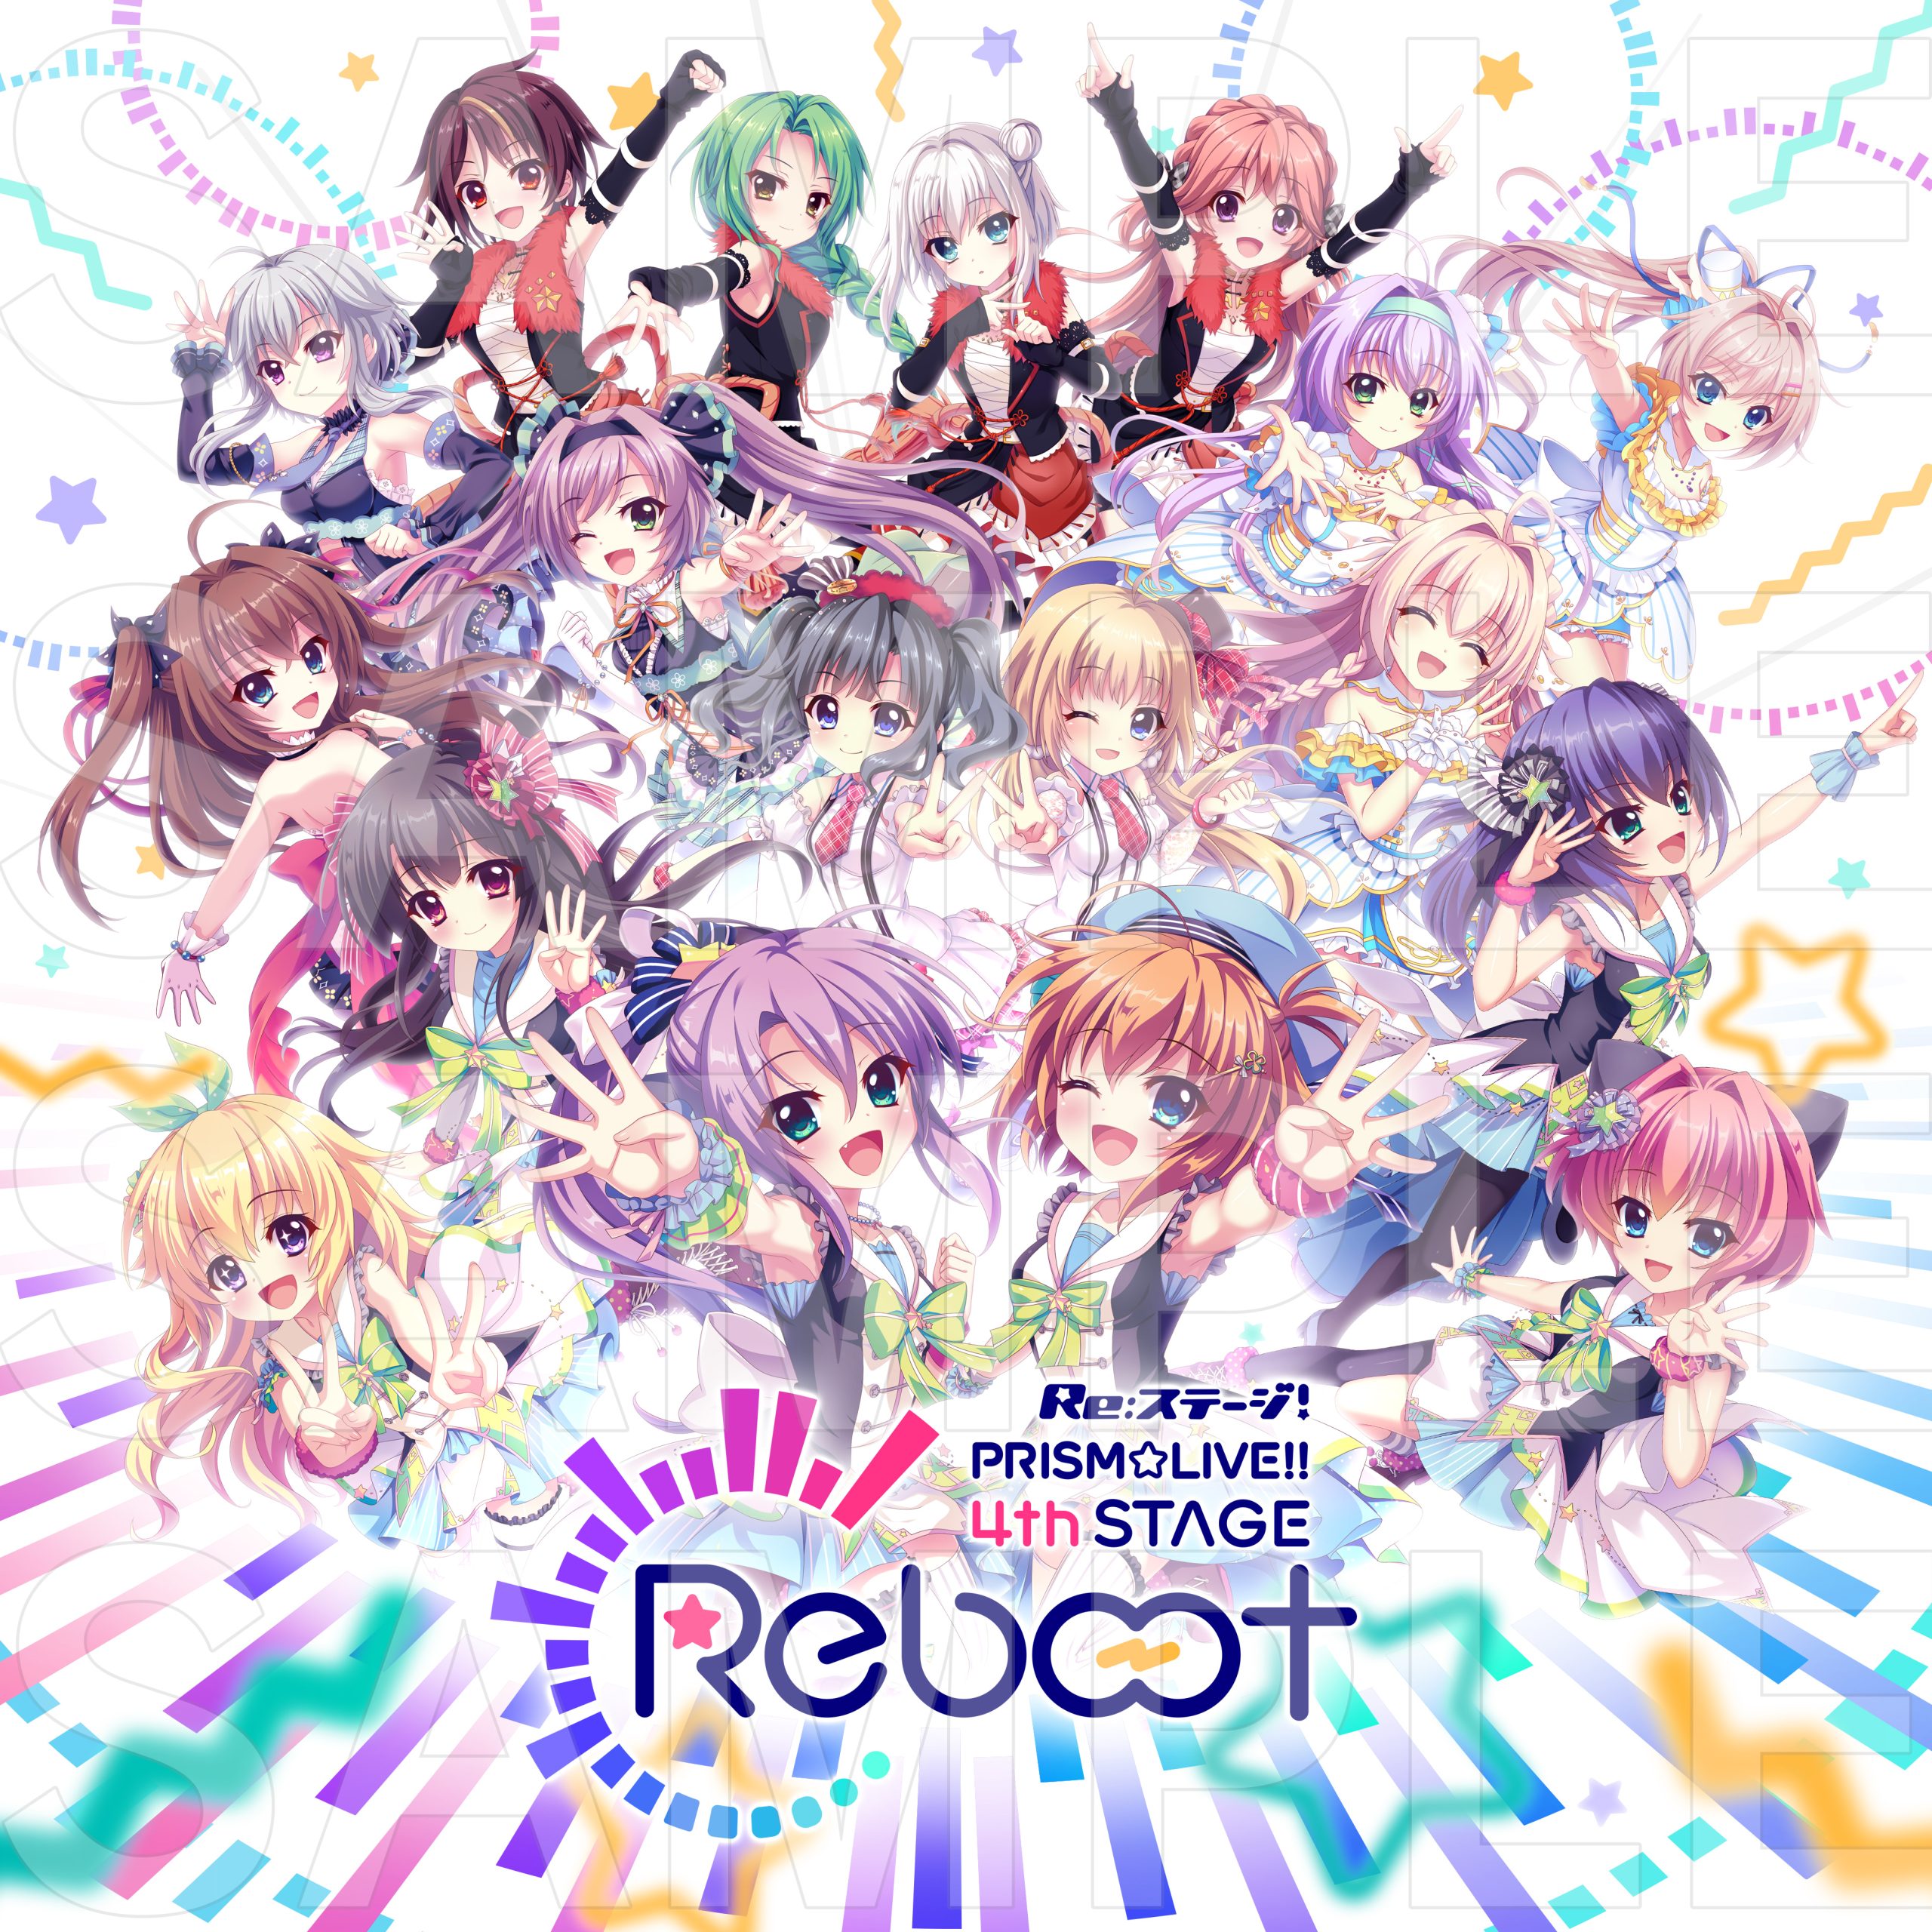 Re:ステージ！PRISM☆LIVE!! 4th STAGE ～Reboot～」 - Re:ステージ！